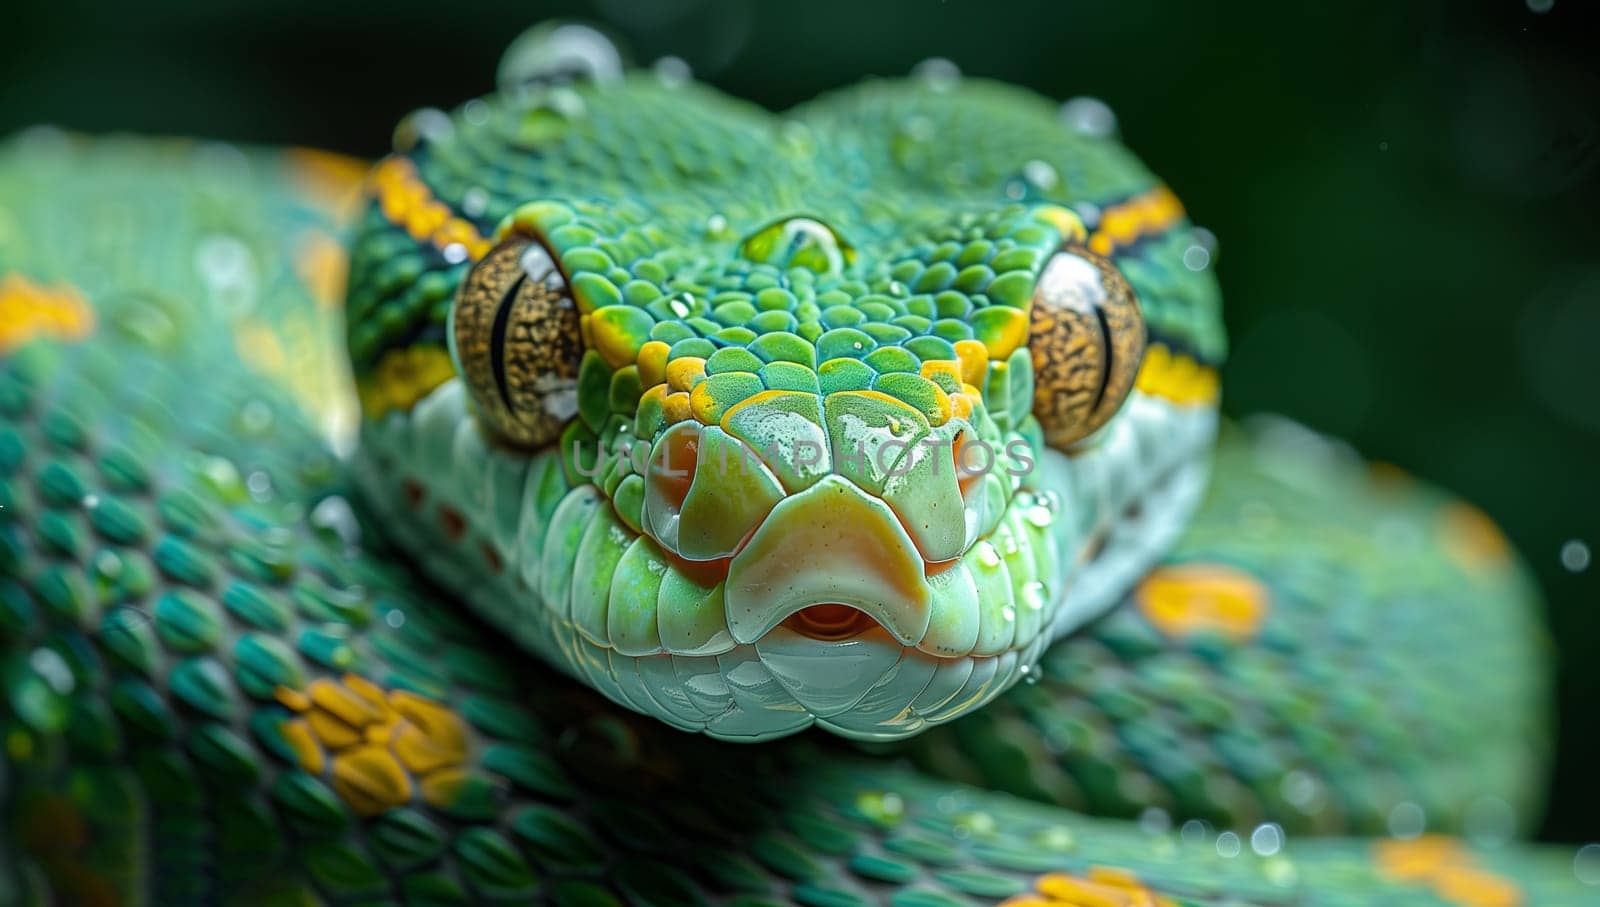 Closeup of a green, scaled reptile with yellow eyes in jungle habitat by richwolf